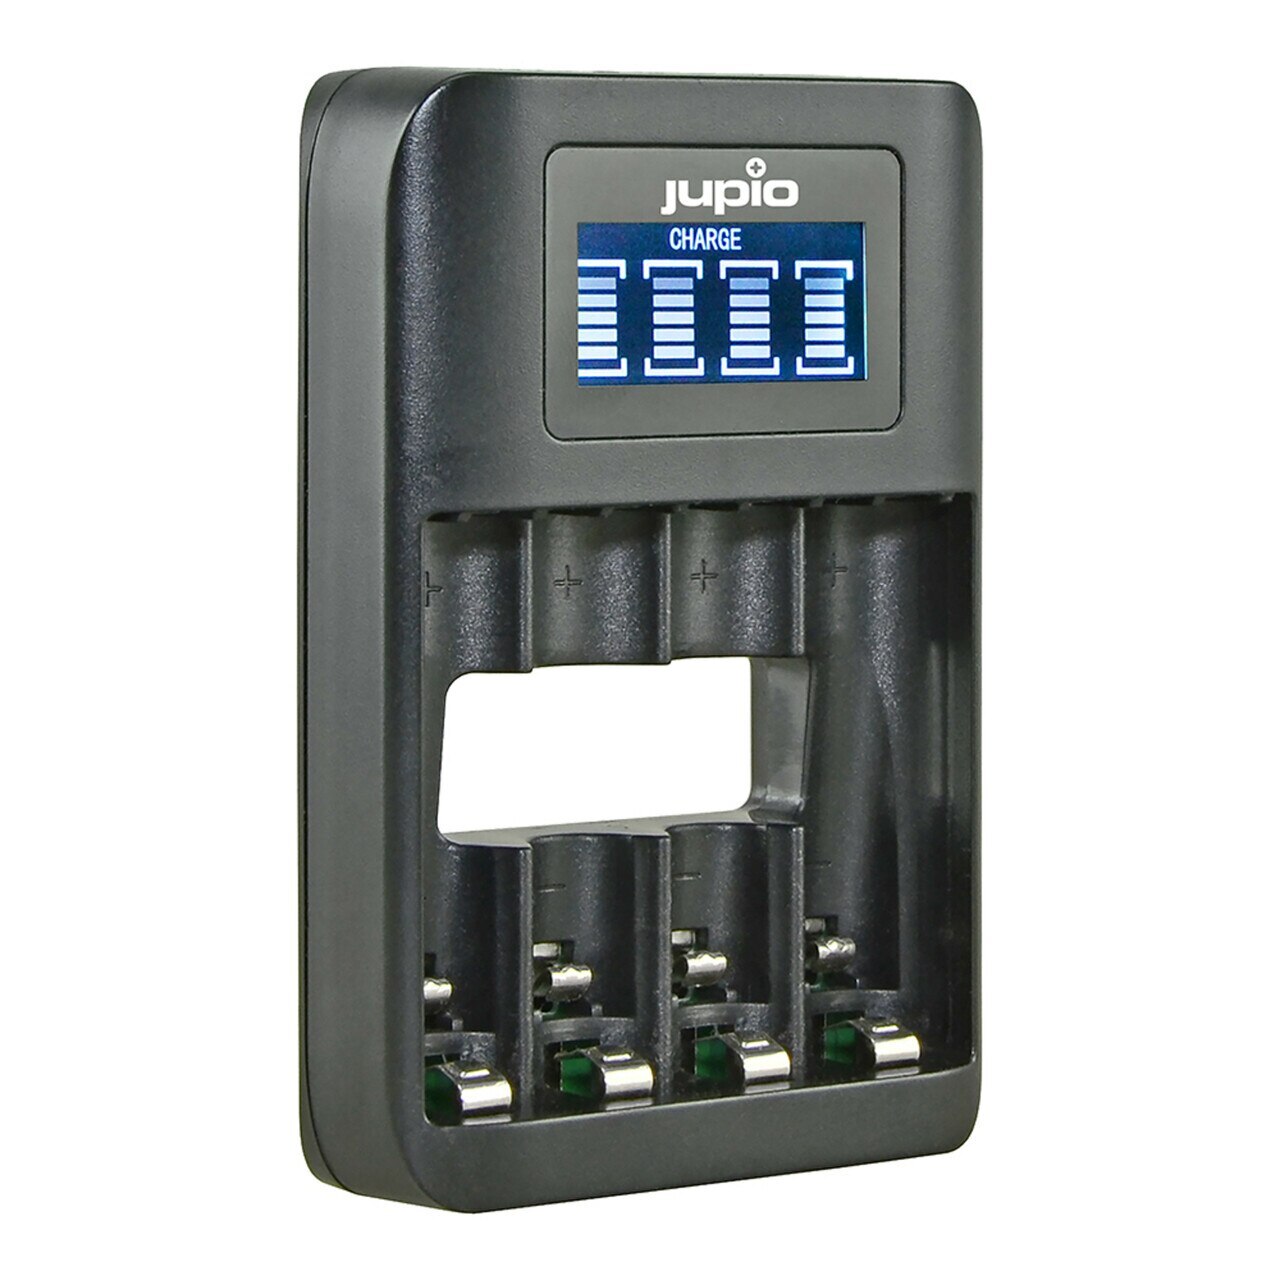 Jupio 4 Slot Fast Battery Charger & LCD Screen for AA & AAA Rechargeable Batteries main image